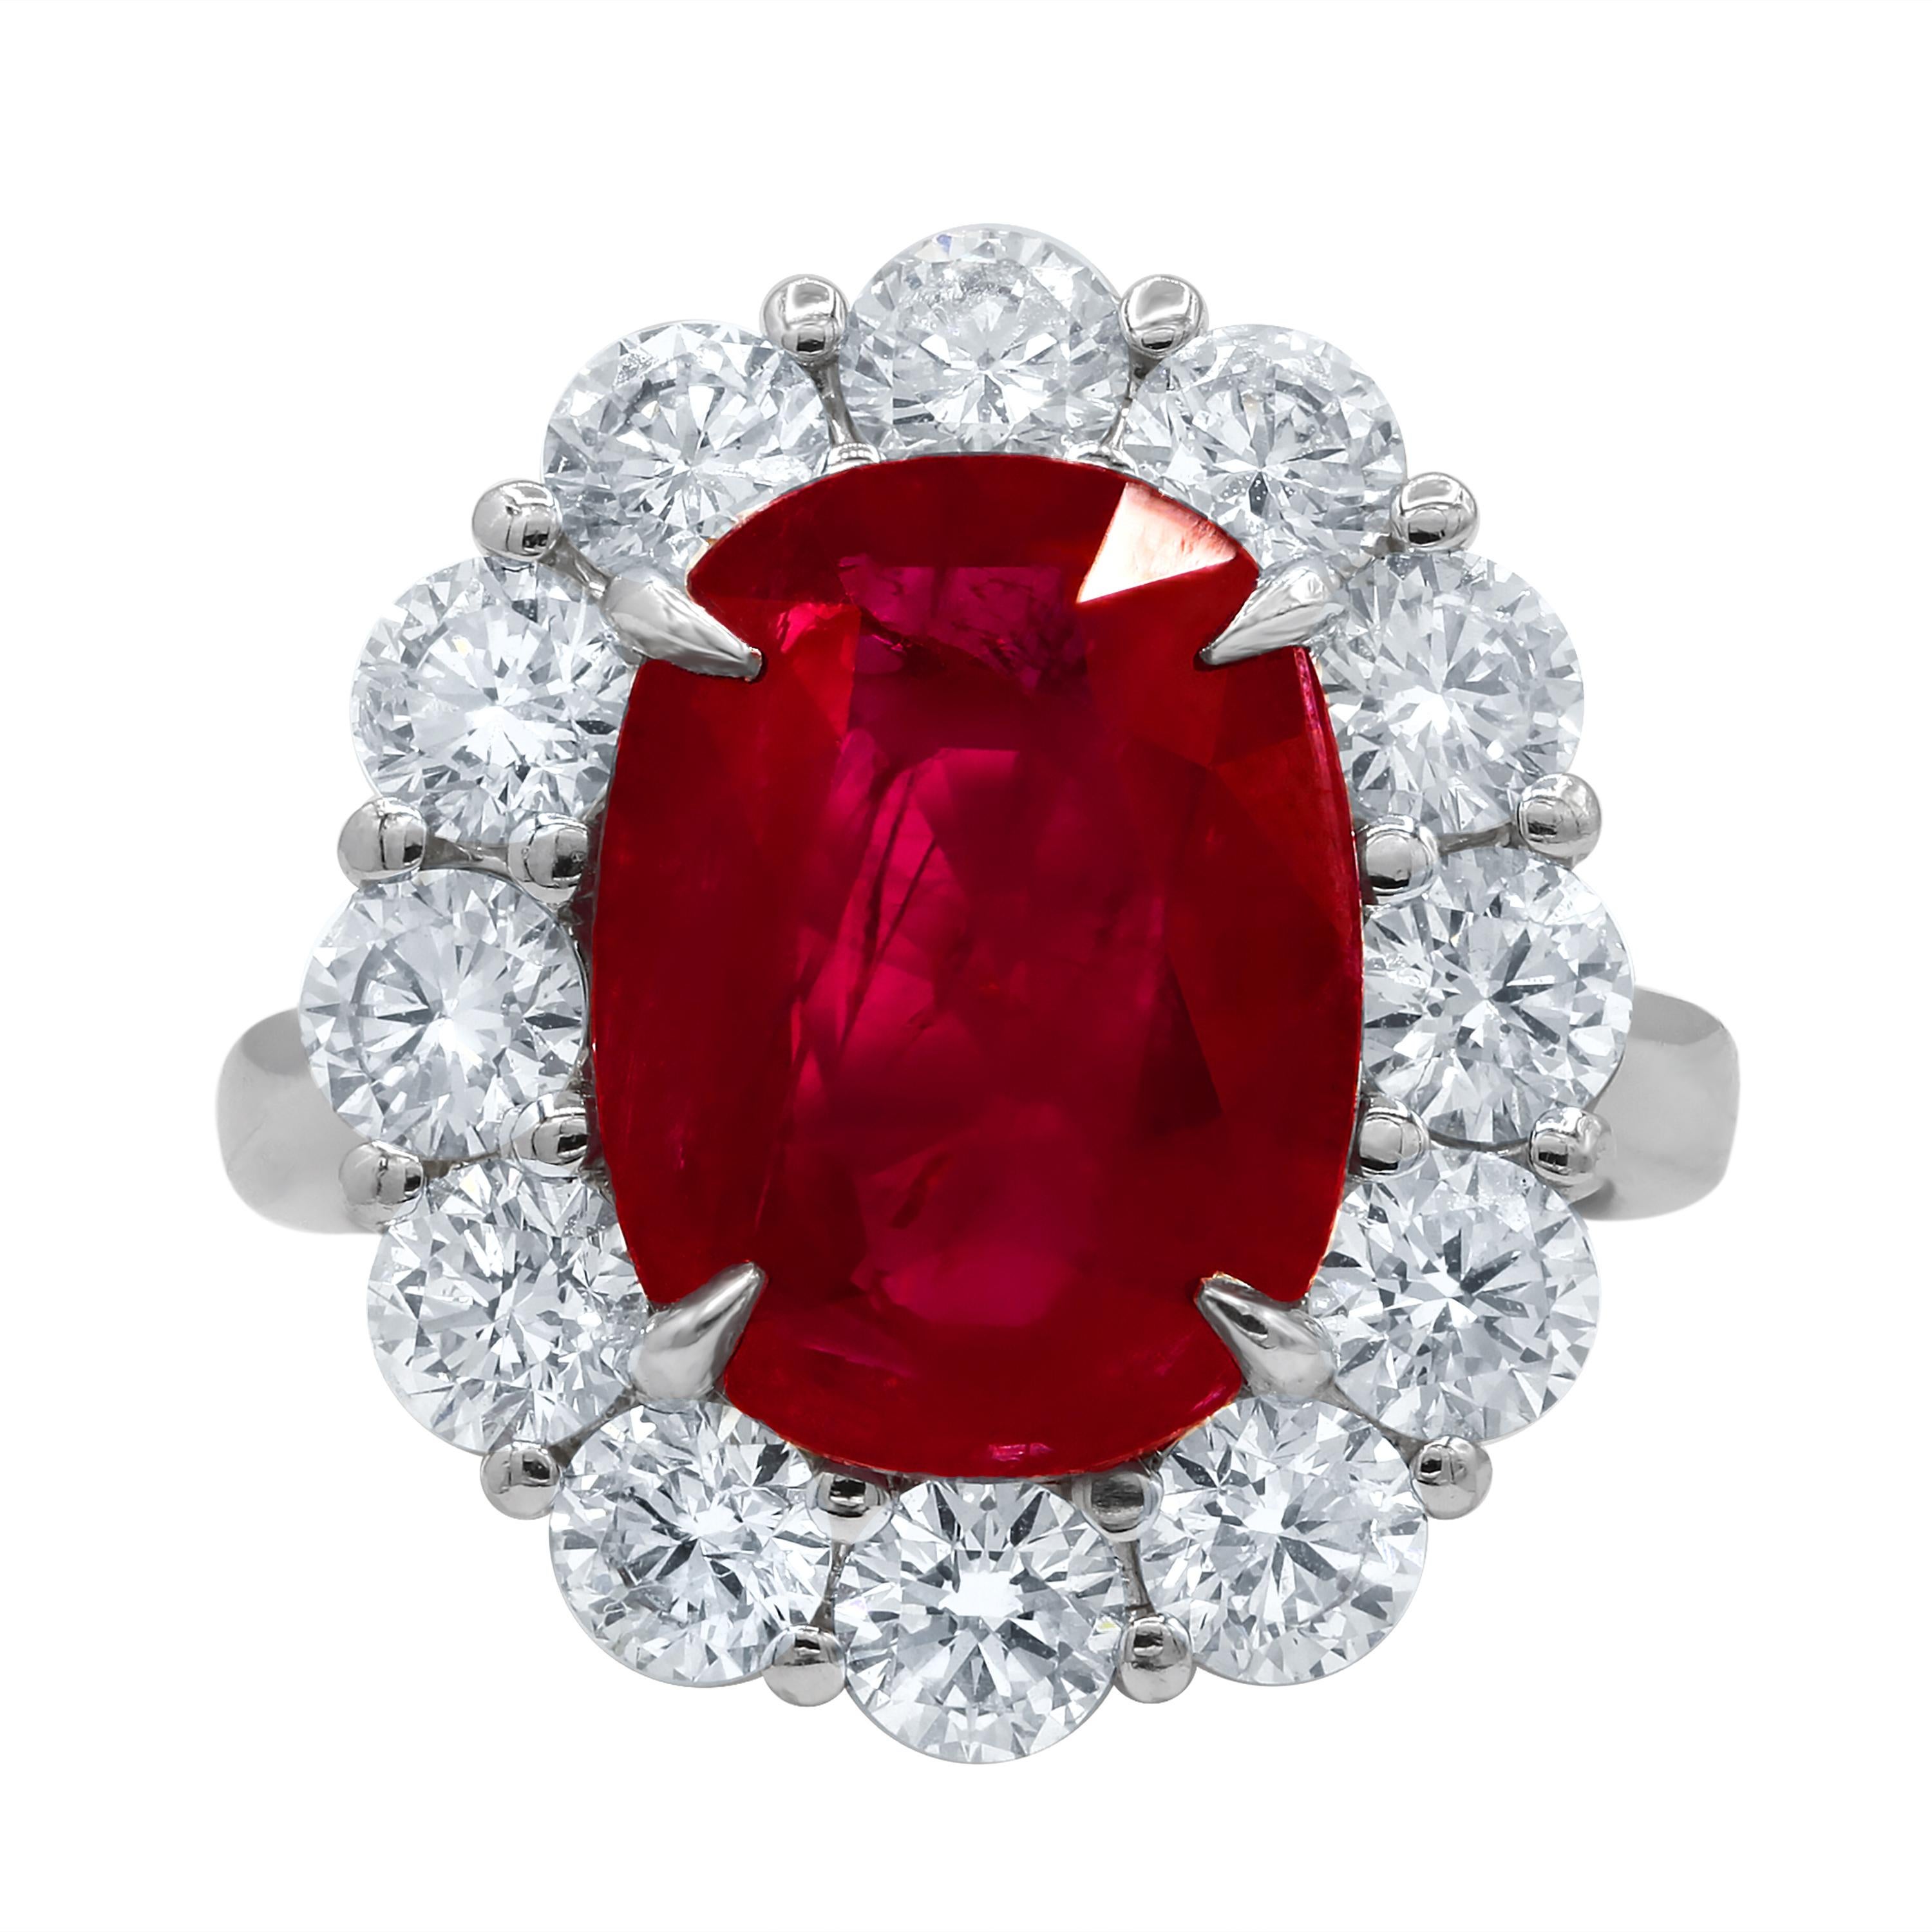 Platinum ruby and diamond ring featuring a 6.06 ct C.Dunaigre certified oval cut ruby surrounded by 2.50 cts tw of diamonds.
Diana M. is a leading supplier of top-quality fine jewelry for over 35 years.
Diana M is one-stop shop for all your jewelry